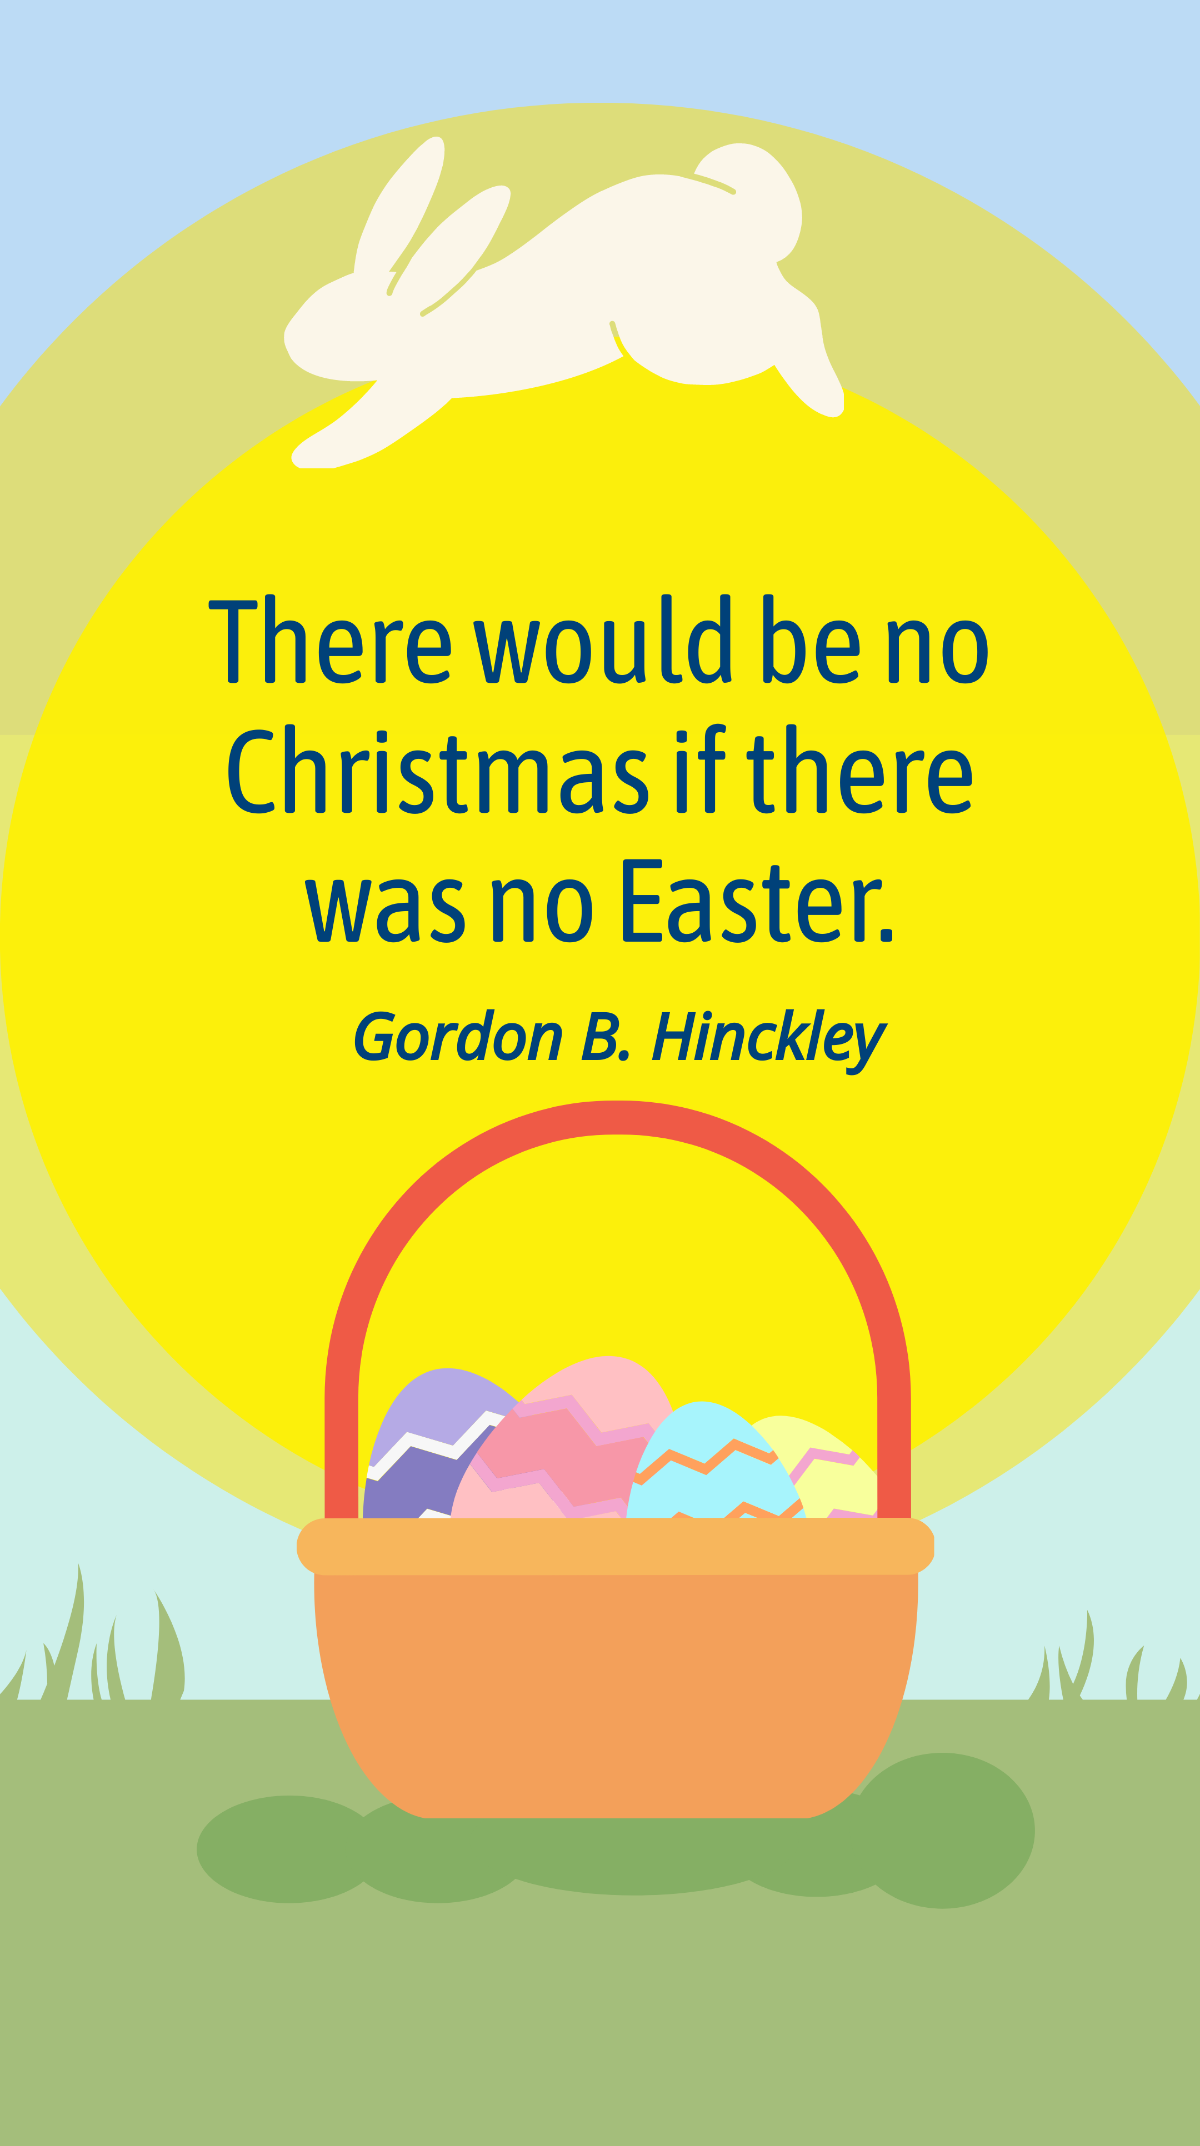 Gordon B. Hinckley - There would be no Christmas if there was no Easter. Template